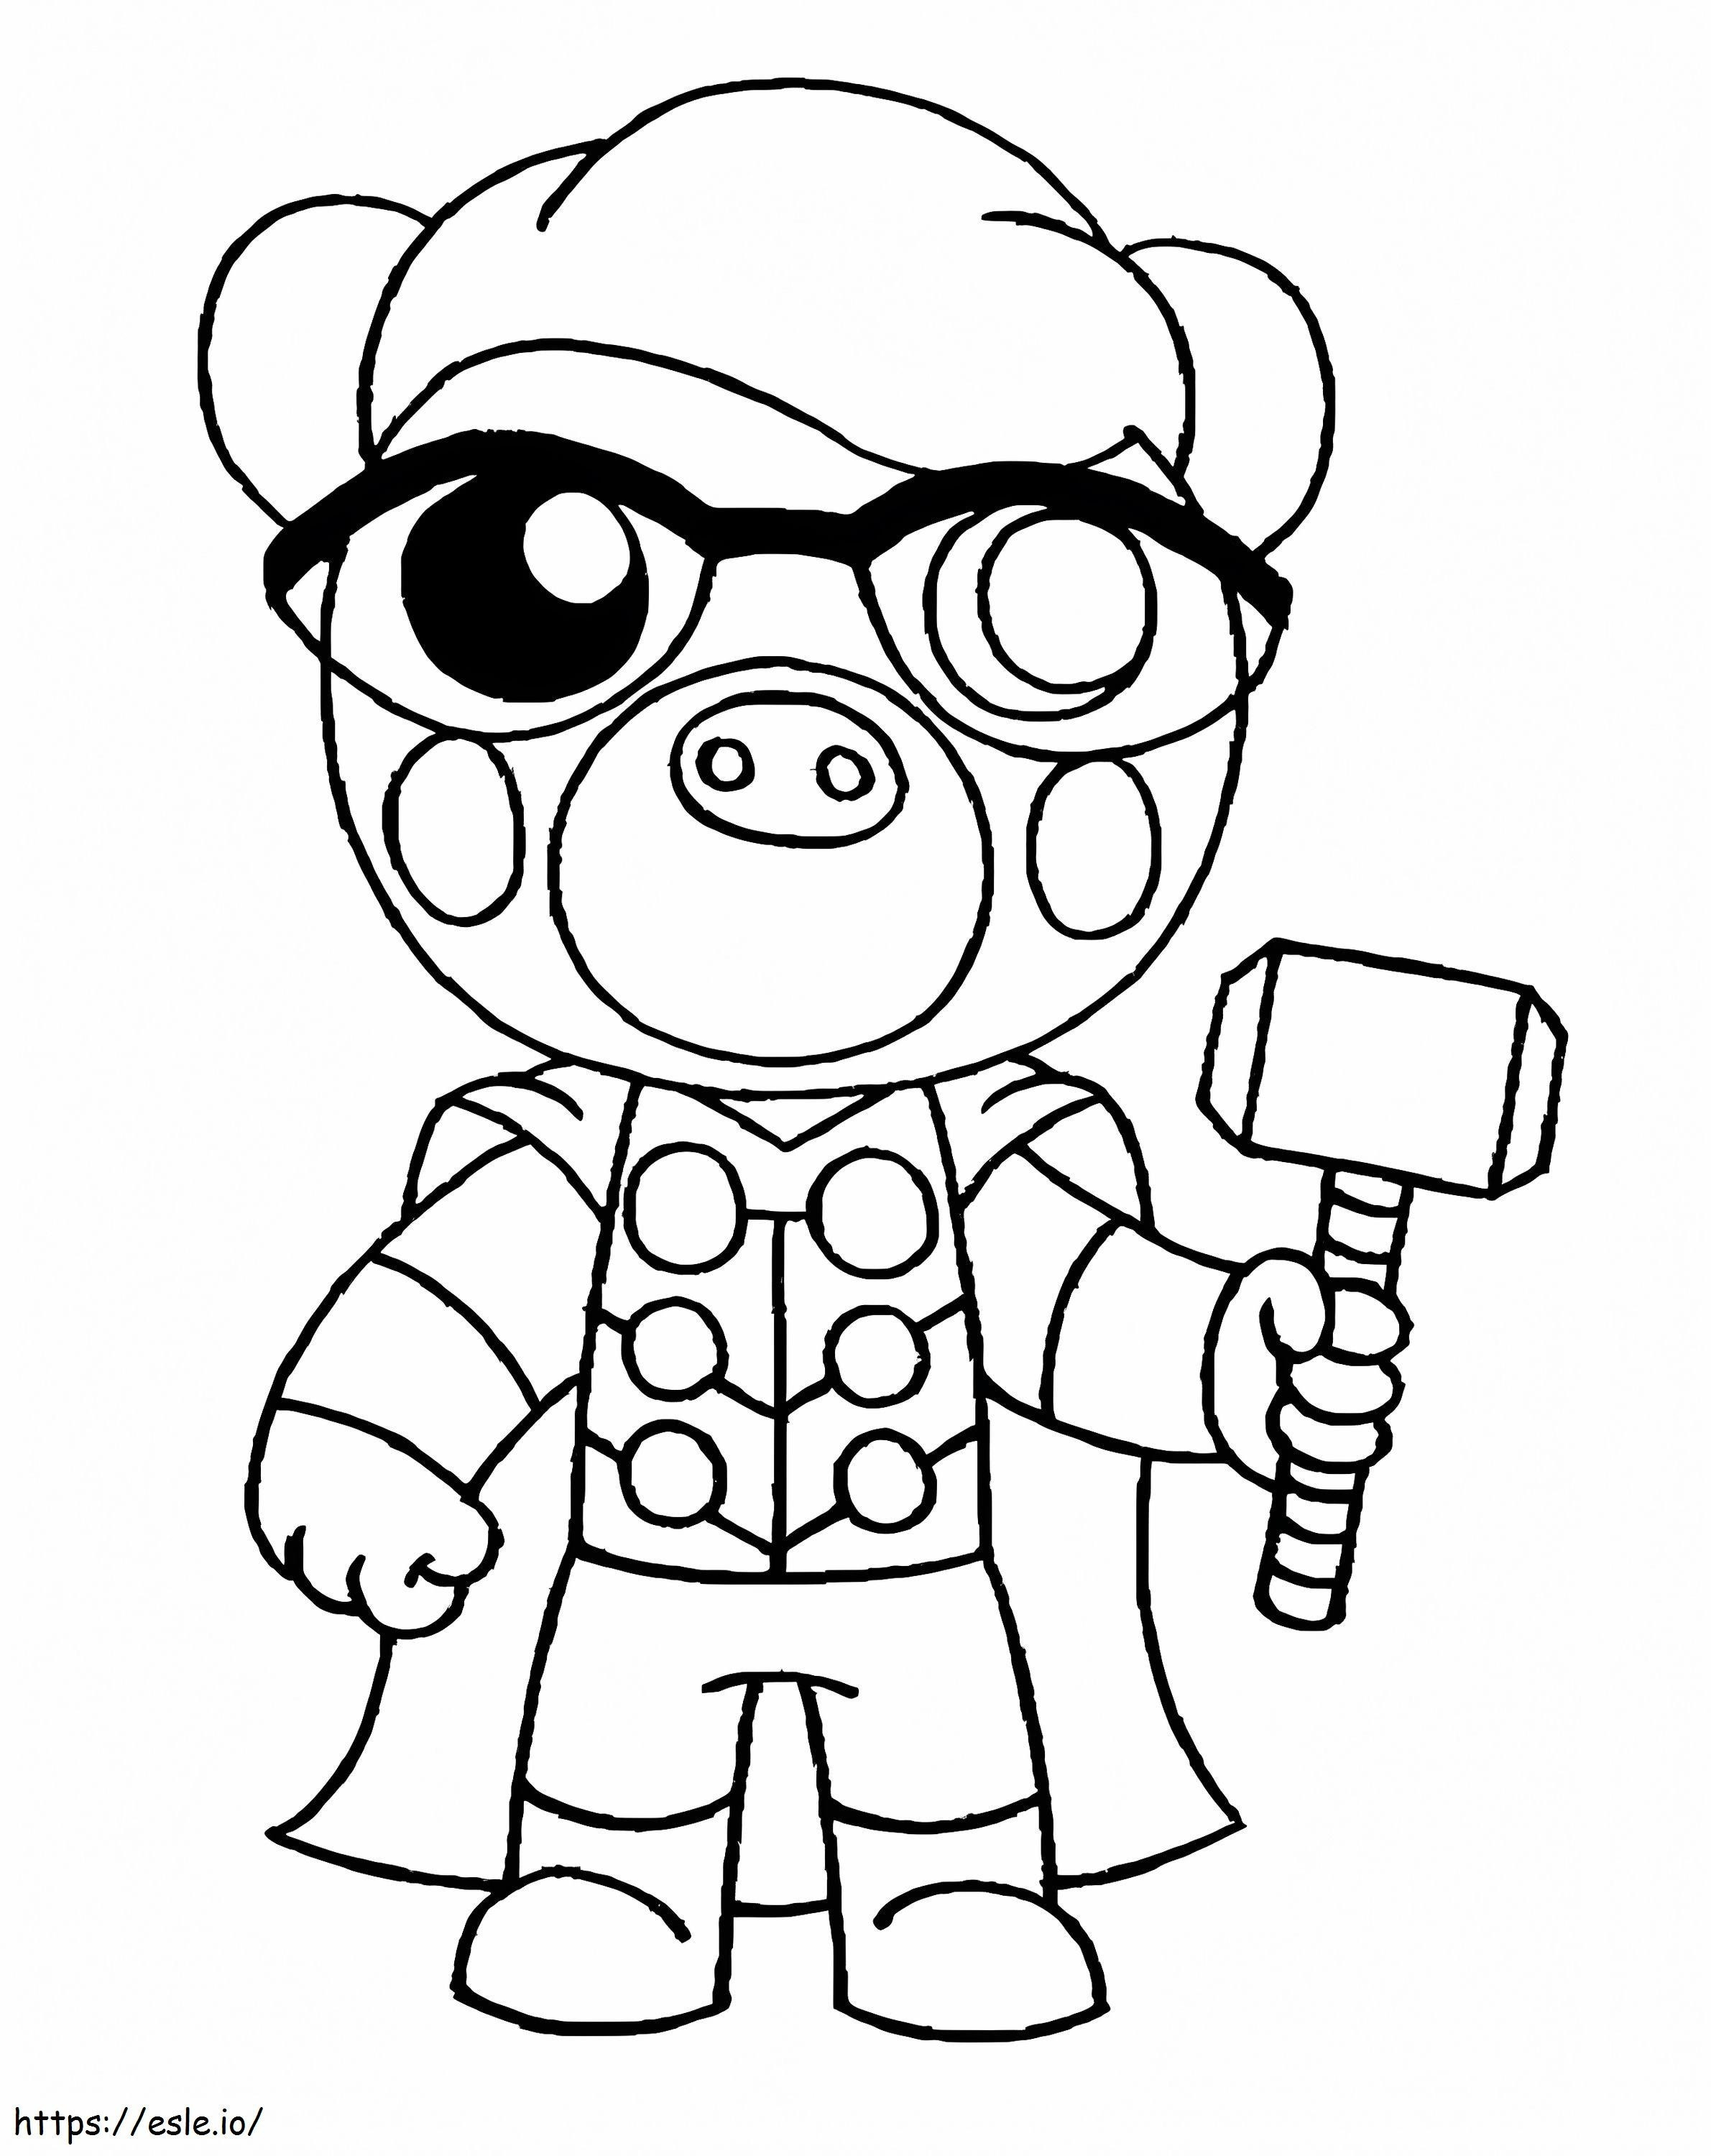 Thor Pony Piggy Roblox coloring page